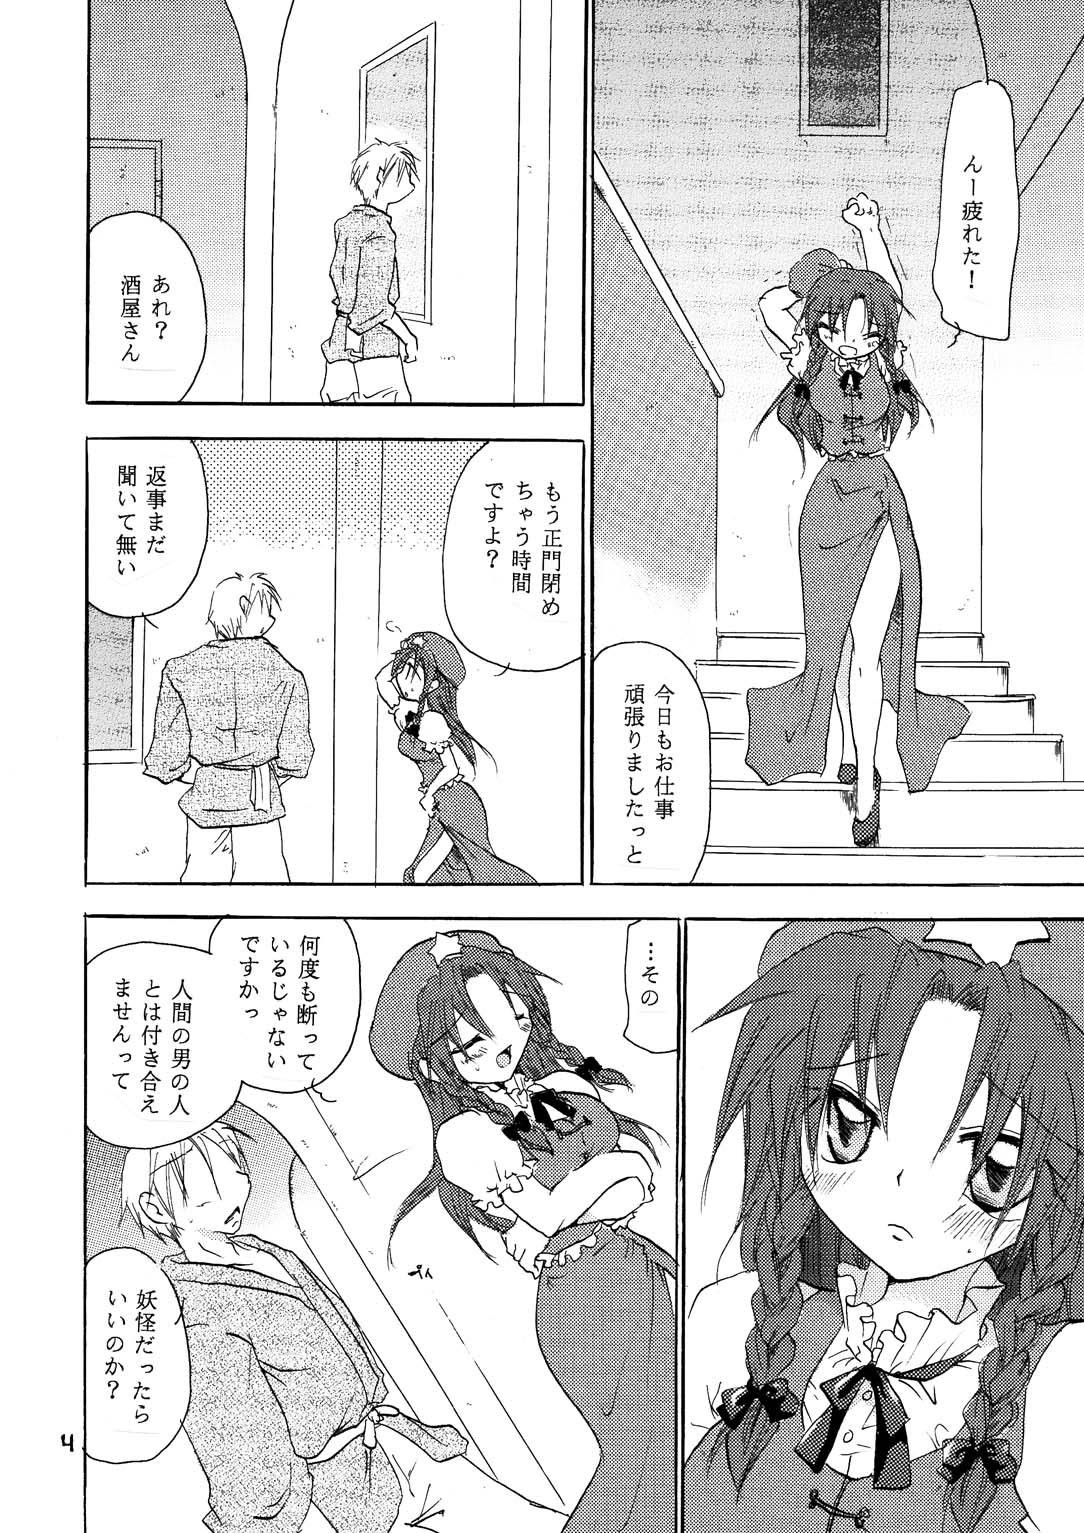 Speculum Meiling Kawaii yo Meiling - Touhou project Vintage - Page 3